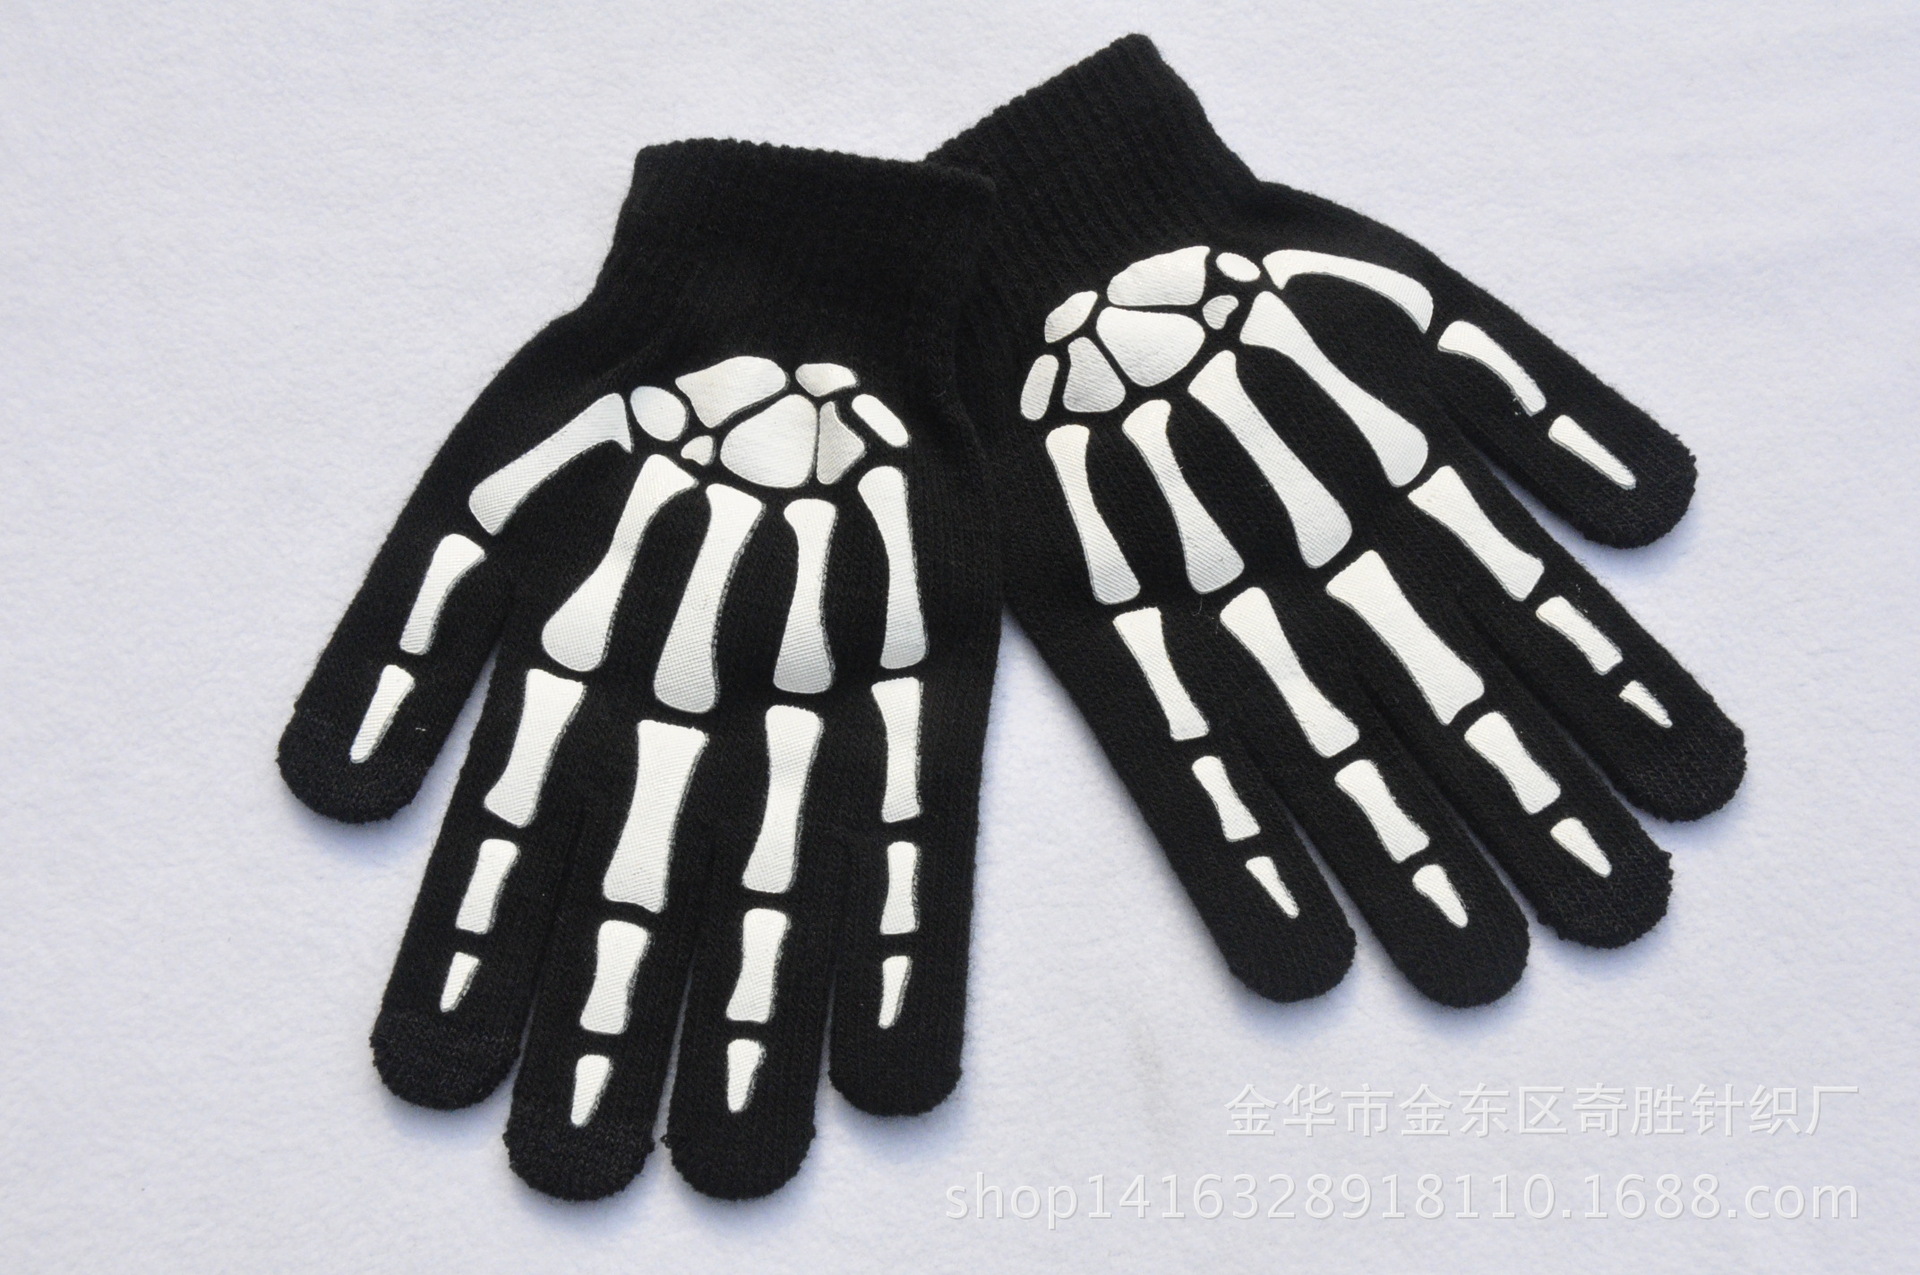 Adult Halloween Skull Ghost Claw Printing Fluorescent Luminous Gloves Outdoor Riding Thermal Knitting Gloves